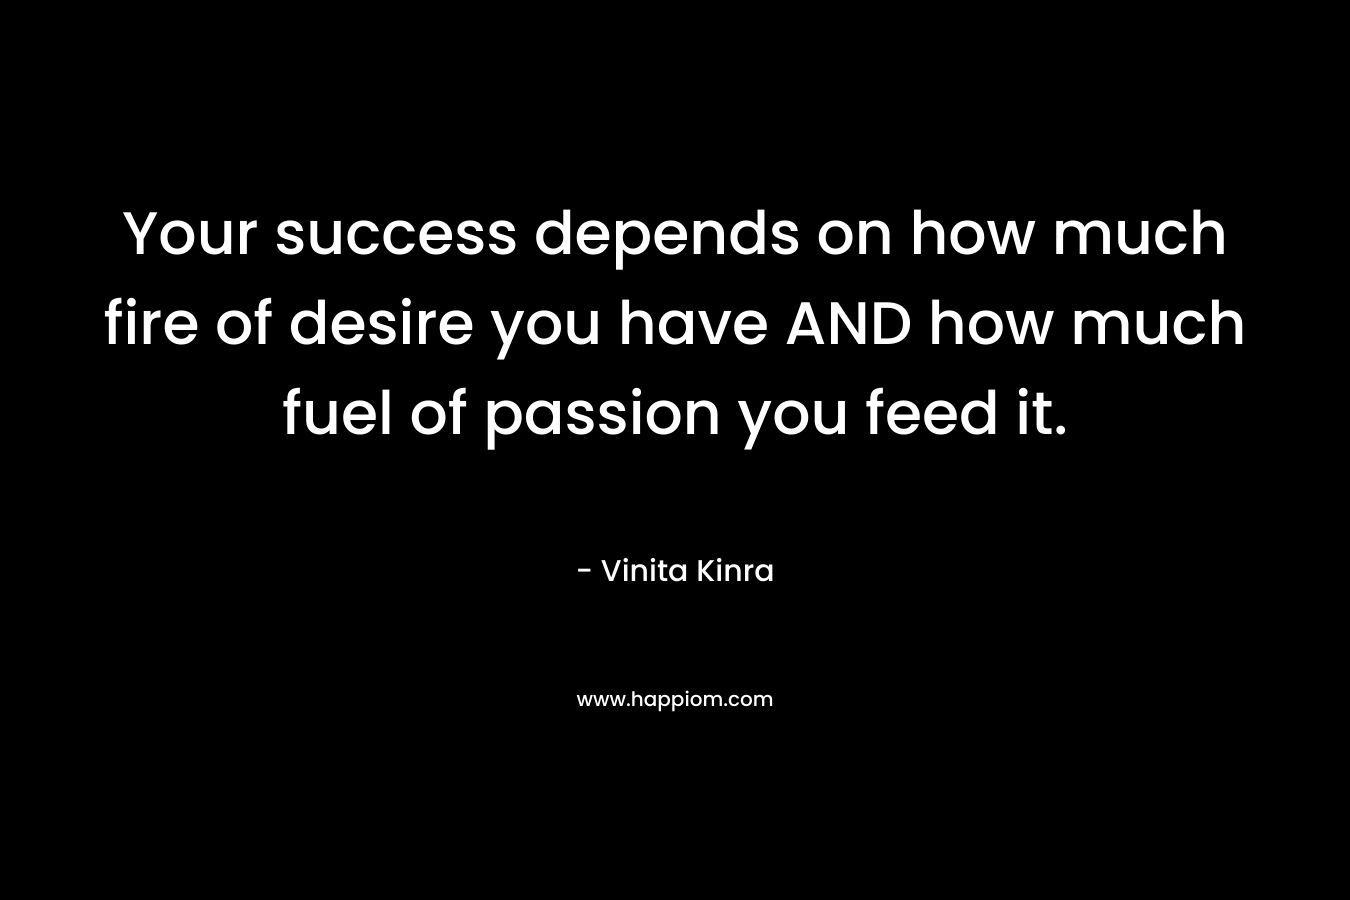 Your success depends on how much fire of desire you have AND how much fuel of passion you feed it. – Vinita Kinra